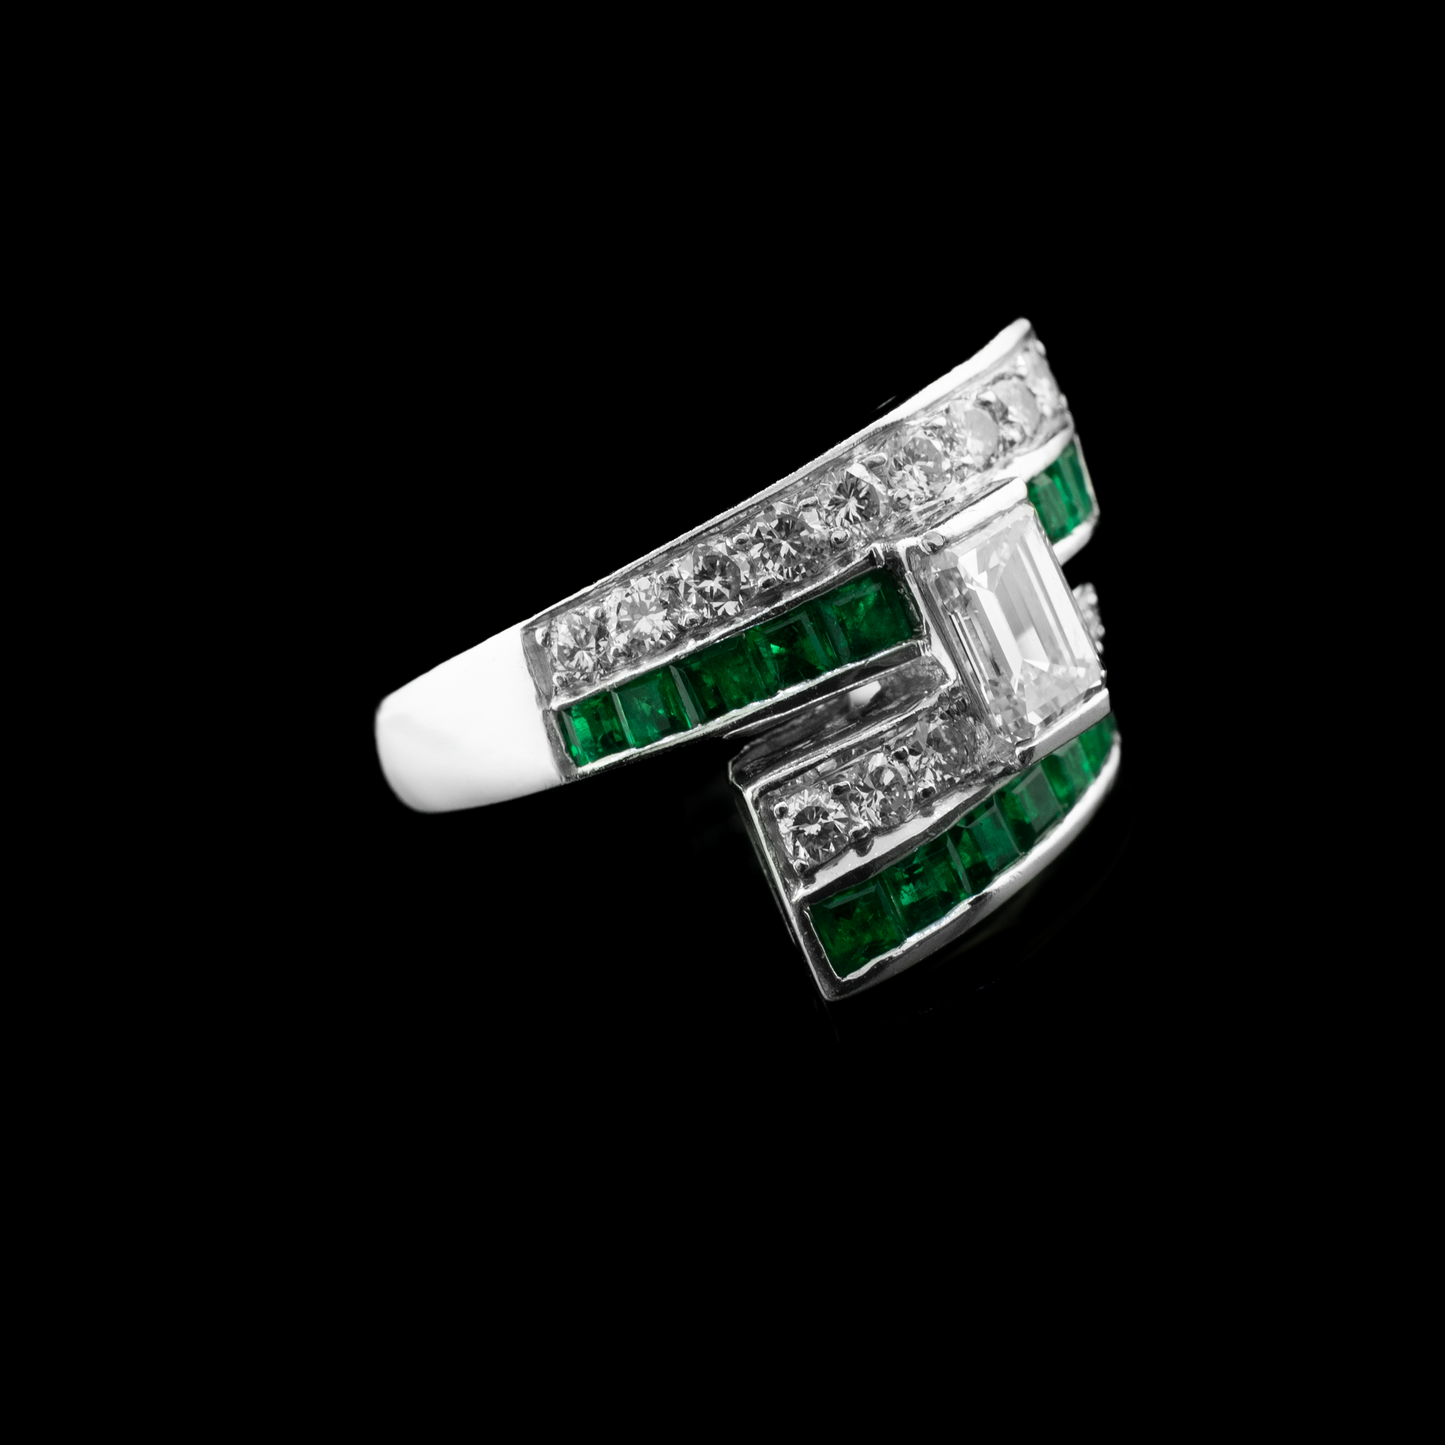 The Crossed Paths Emerald Ring